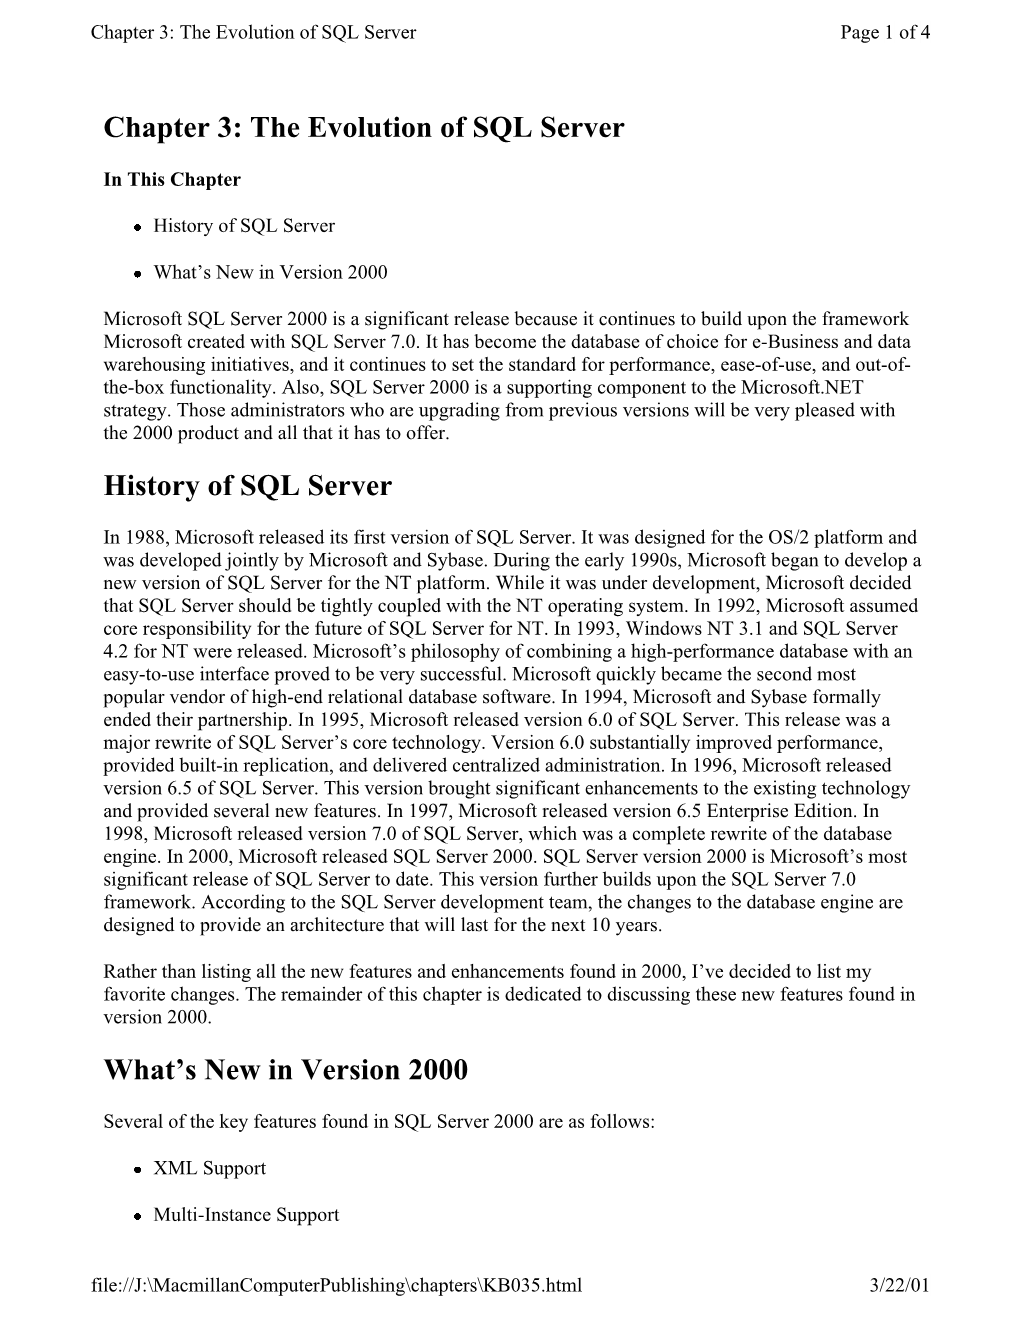 Chapter 3: the Evolution of SQL Server History of SQL Server What's New in Version 2000